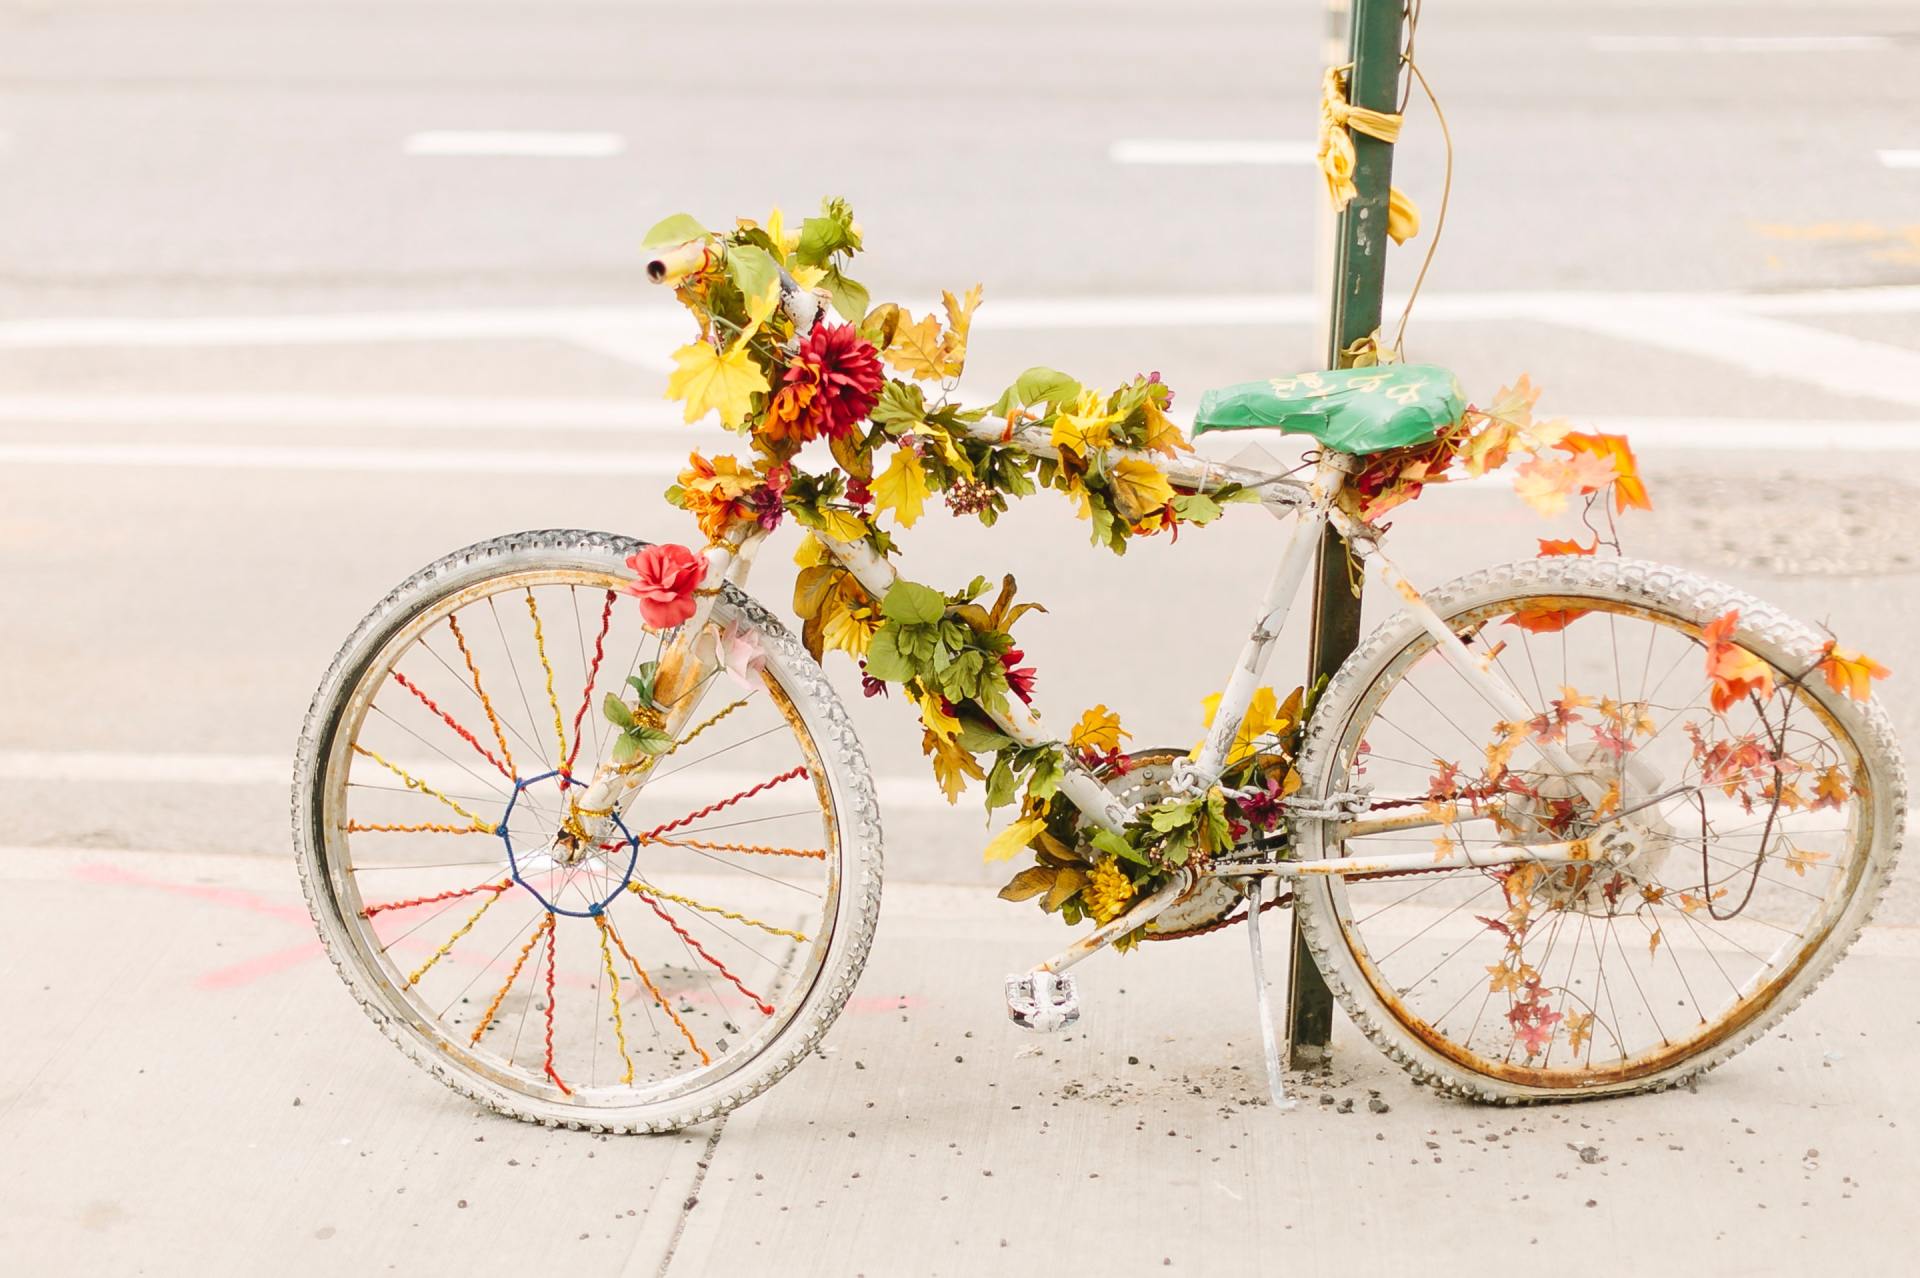 White bike decorated with flowers leaning on a post represents a cyclist killed while riding.